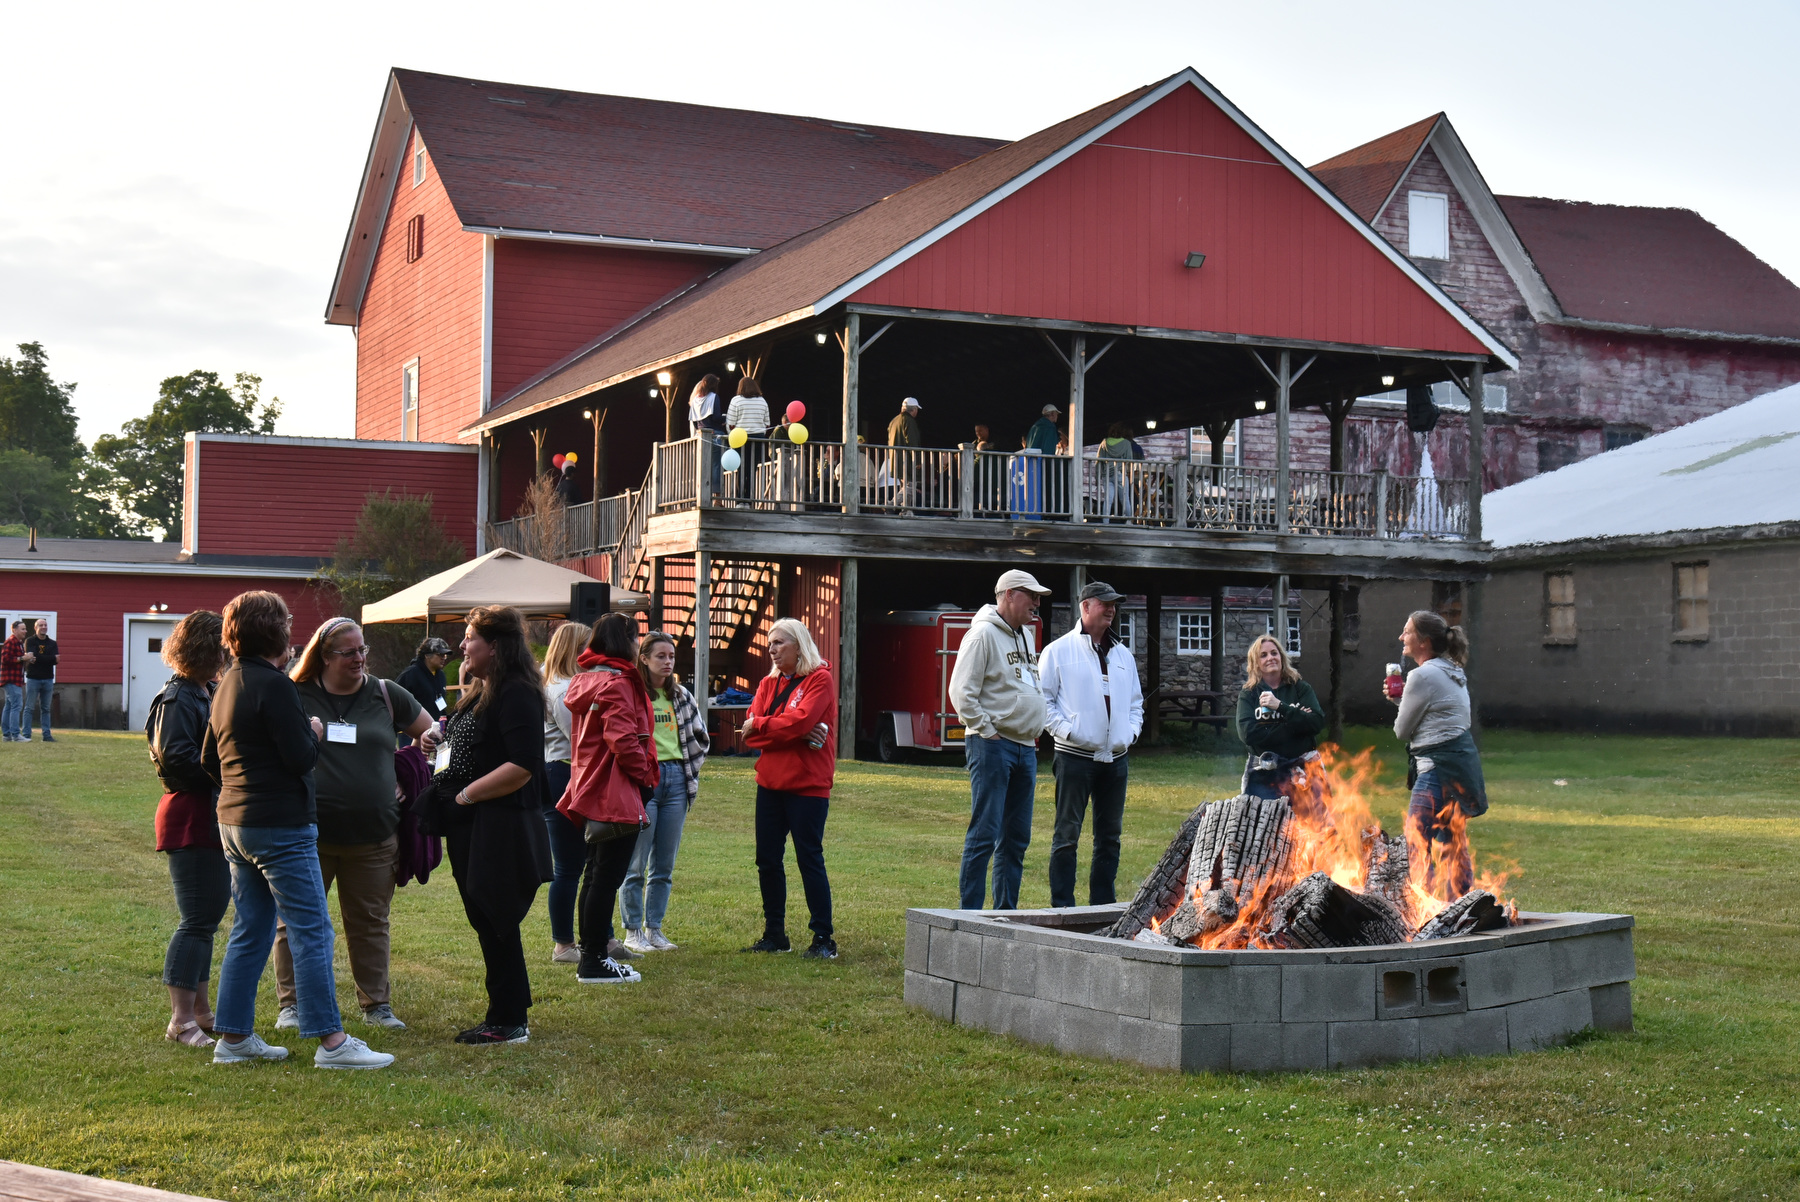 The annual Reunion barbecue features a chance to catch up with friends, tasty food and a bonfire outside of Fallbrook.